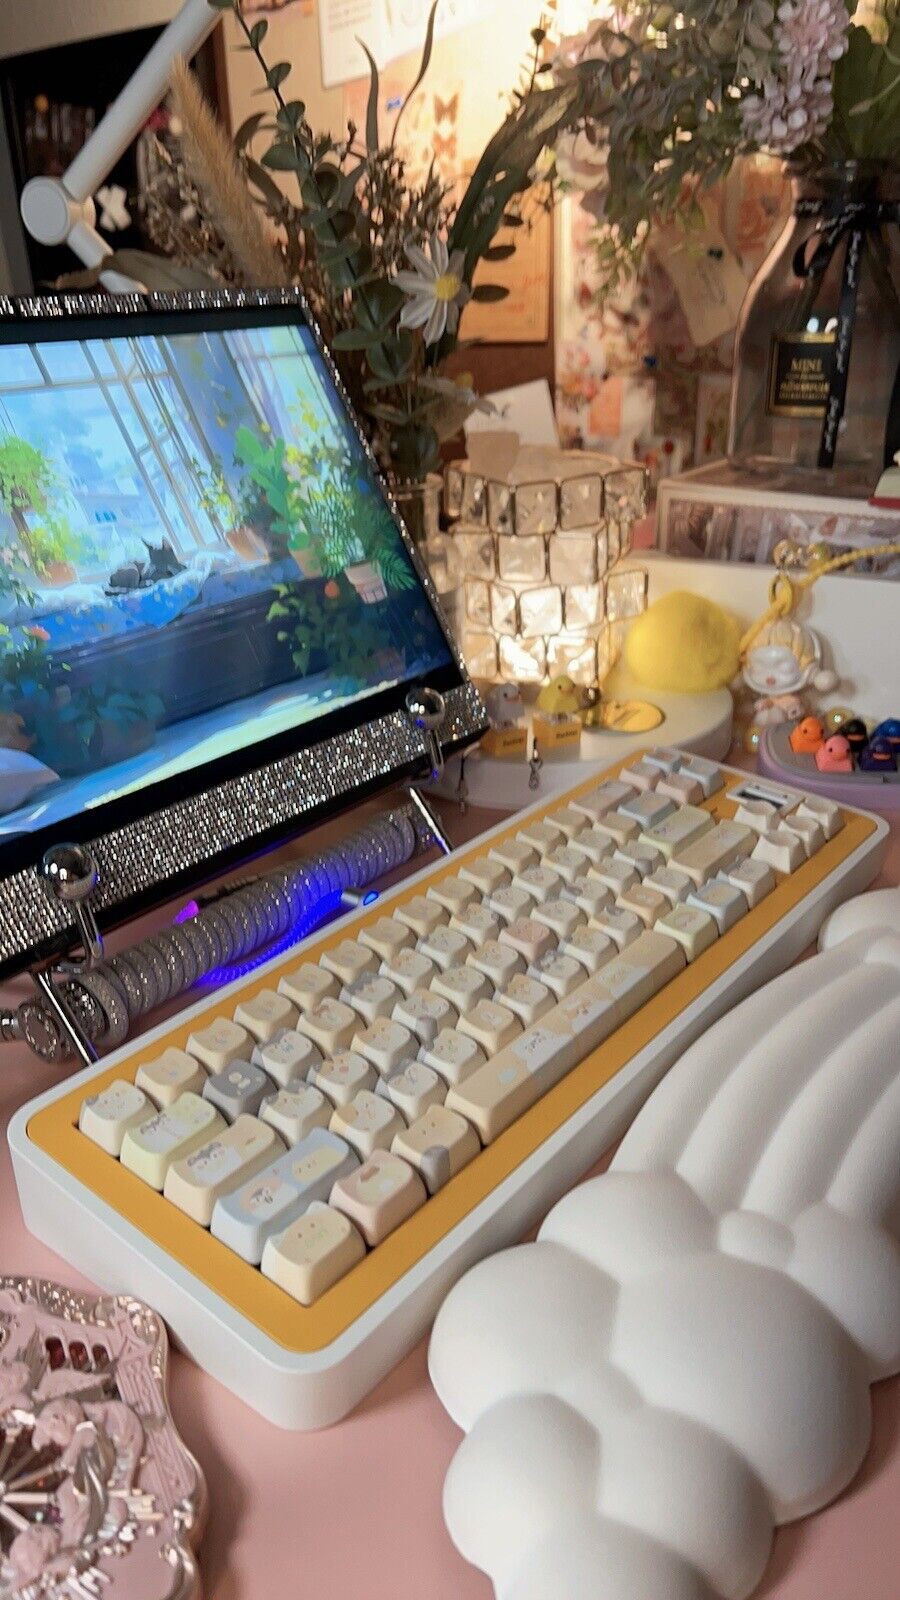 「Fully Assembled」Yellow Cute Cat Ears Pastel Customized Mechanical Keyboard